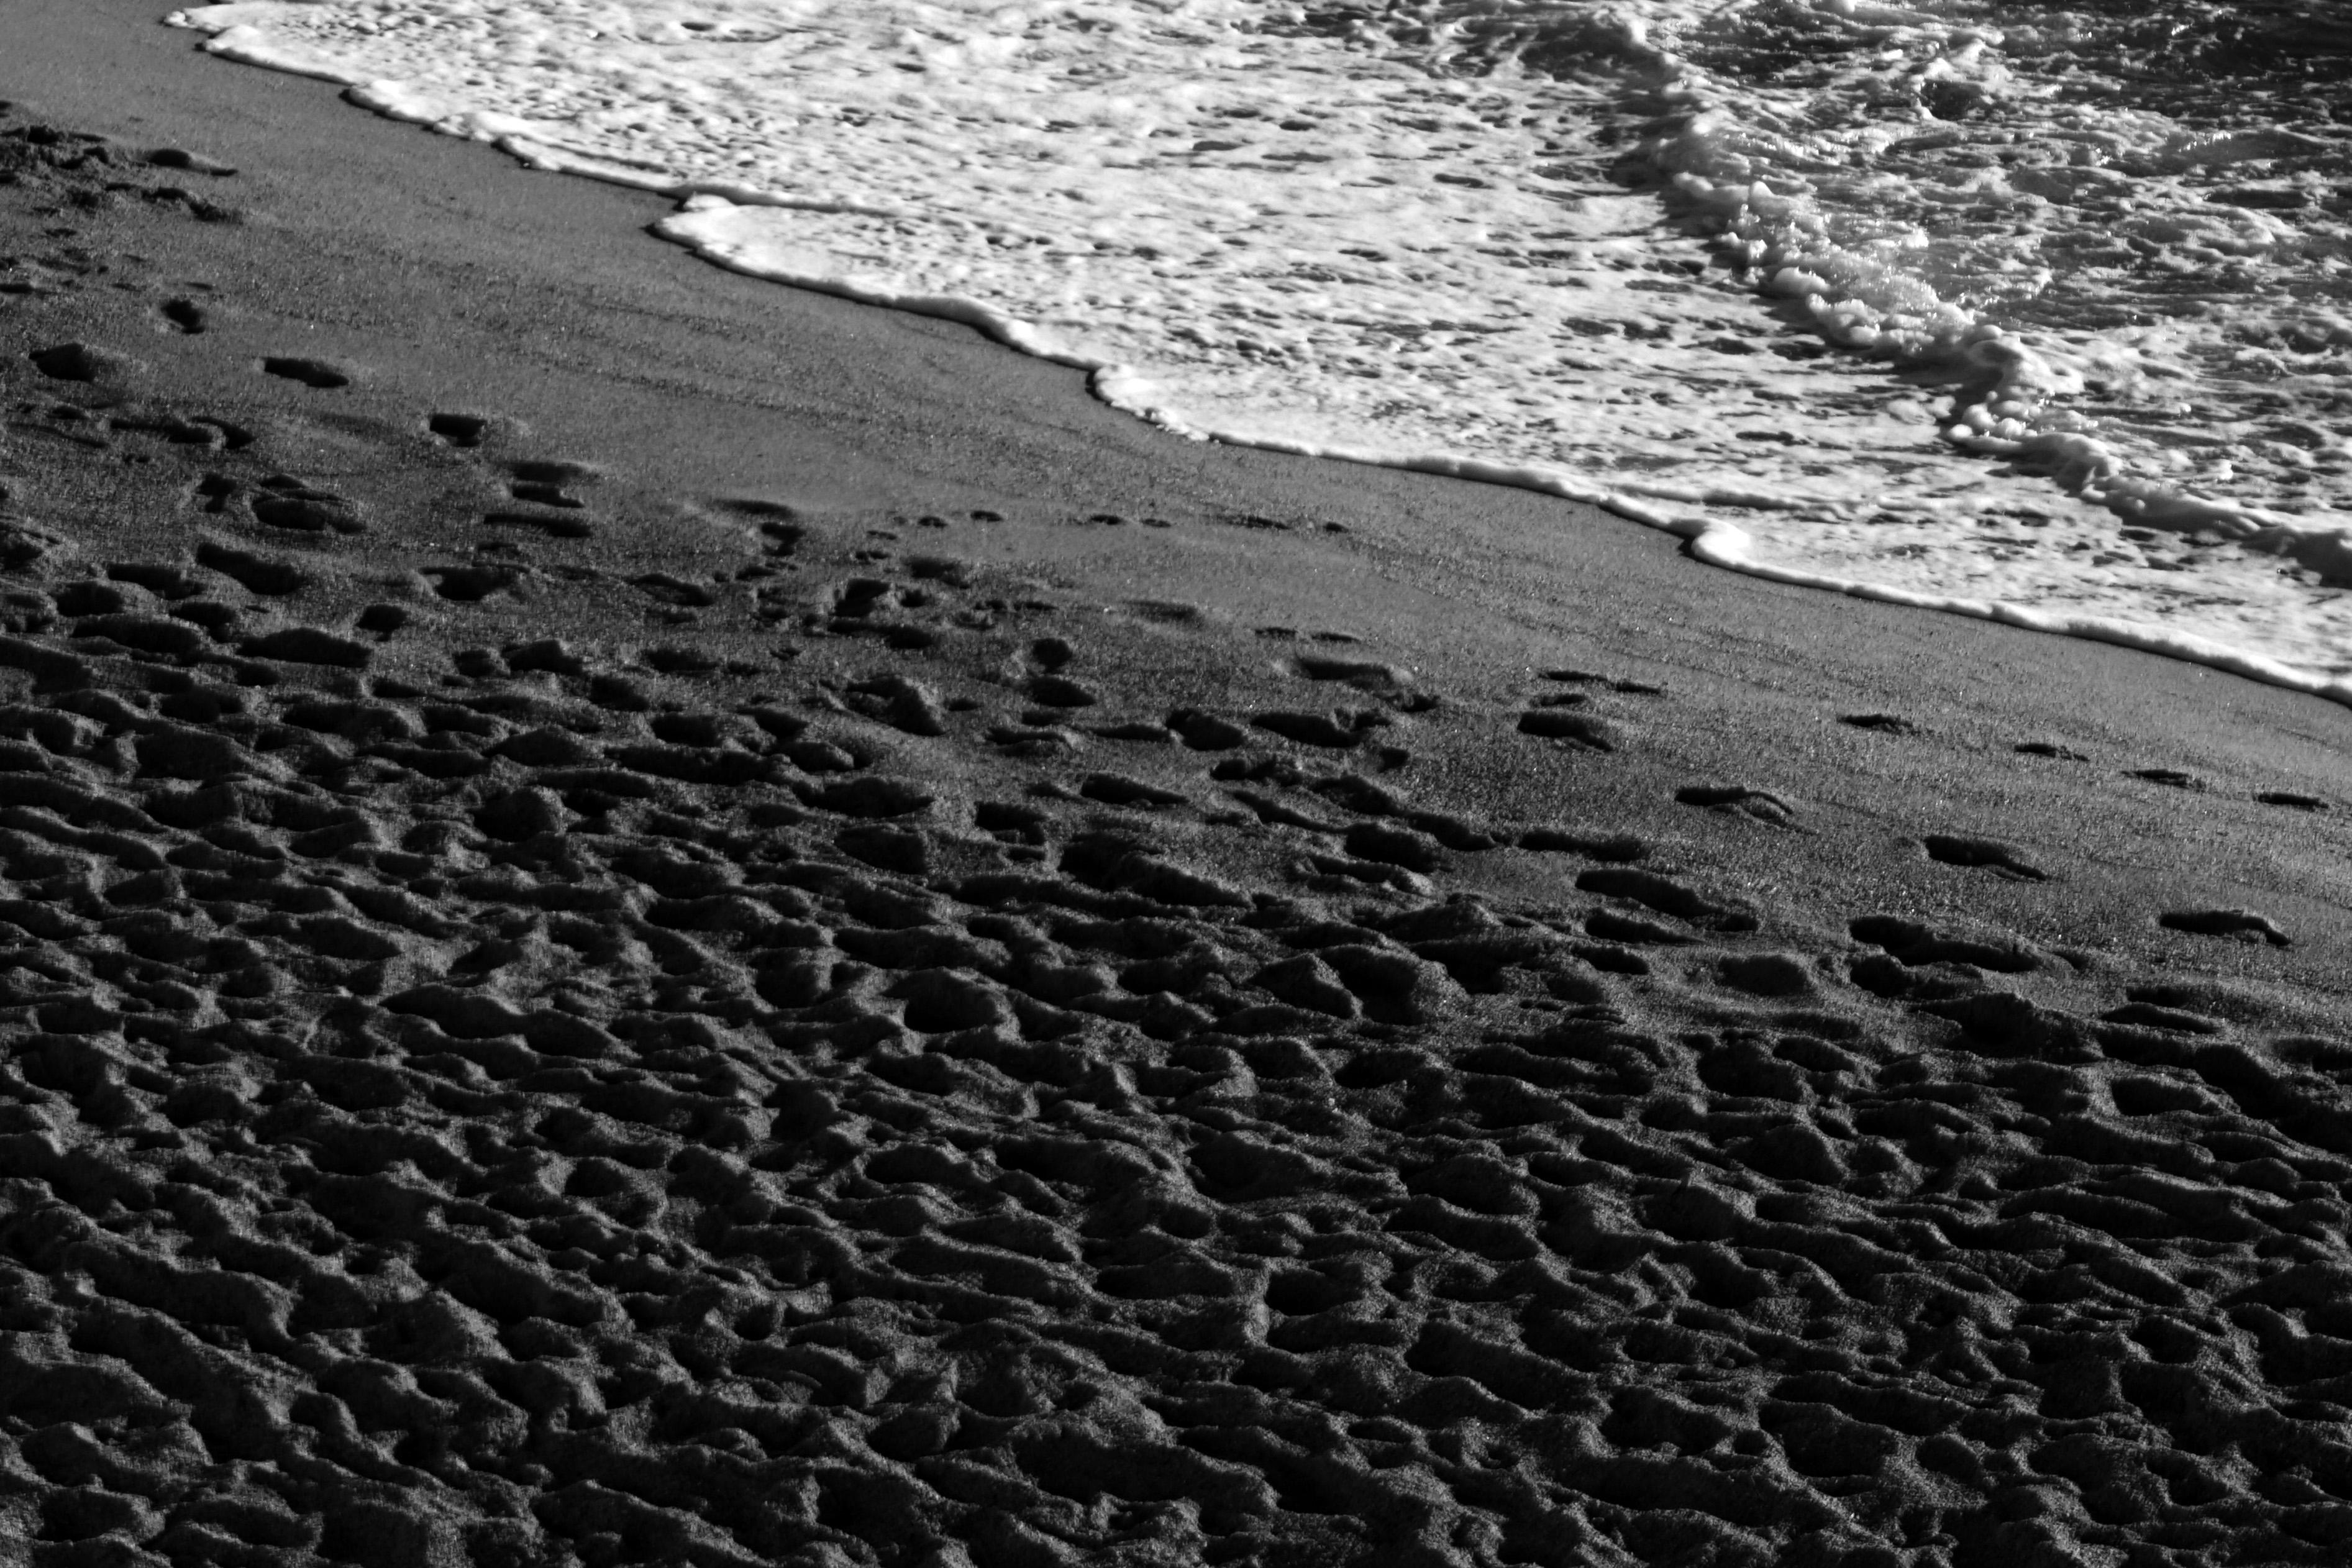 Black and White Giclée Print of Sandy Shore with Foam, Coastal Black and White  - Realist Photograph by Kind of Cyan